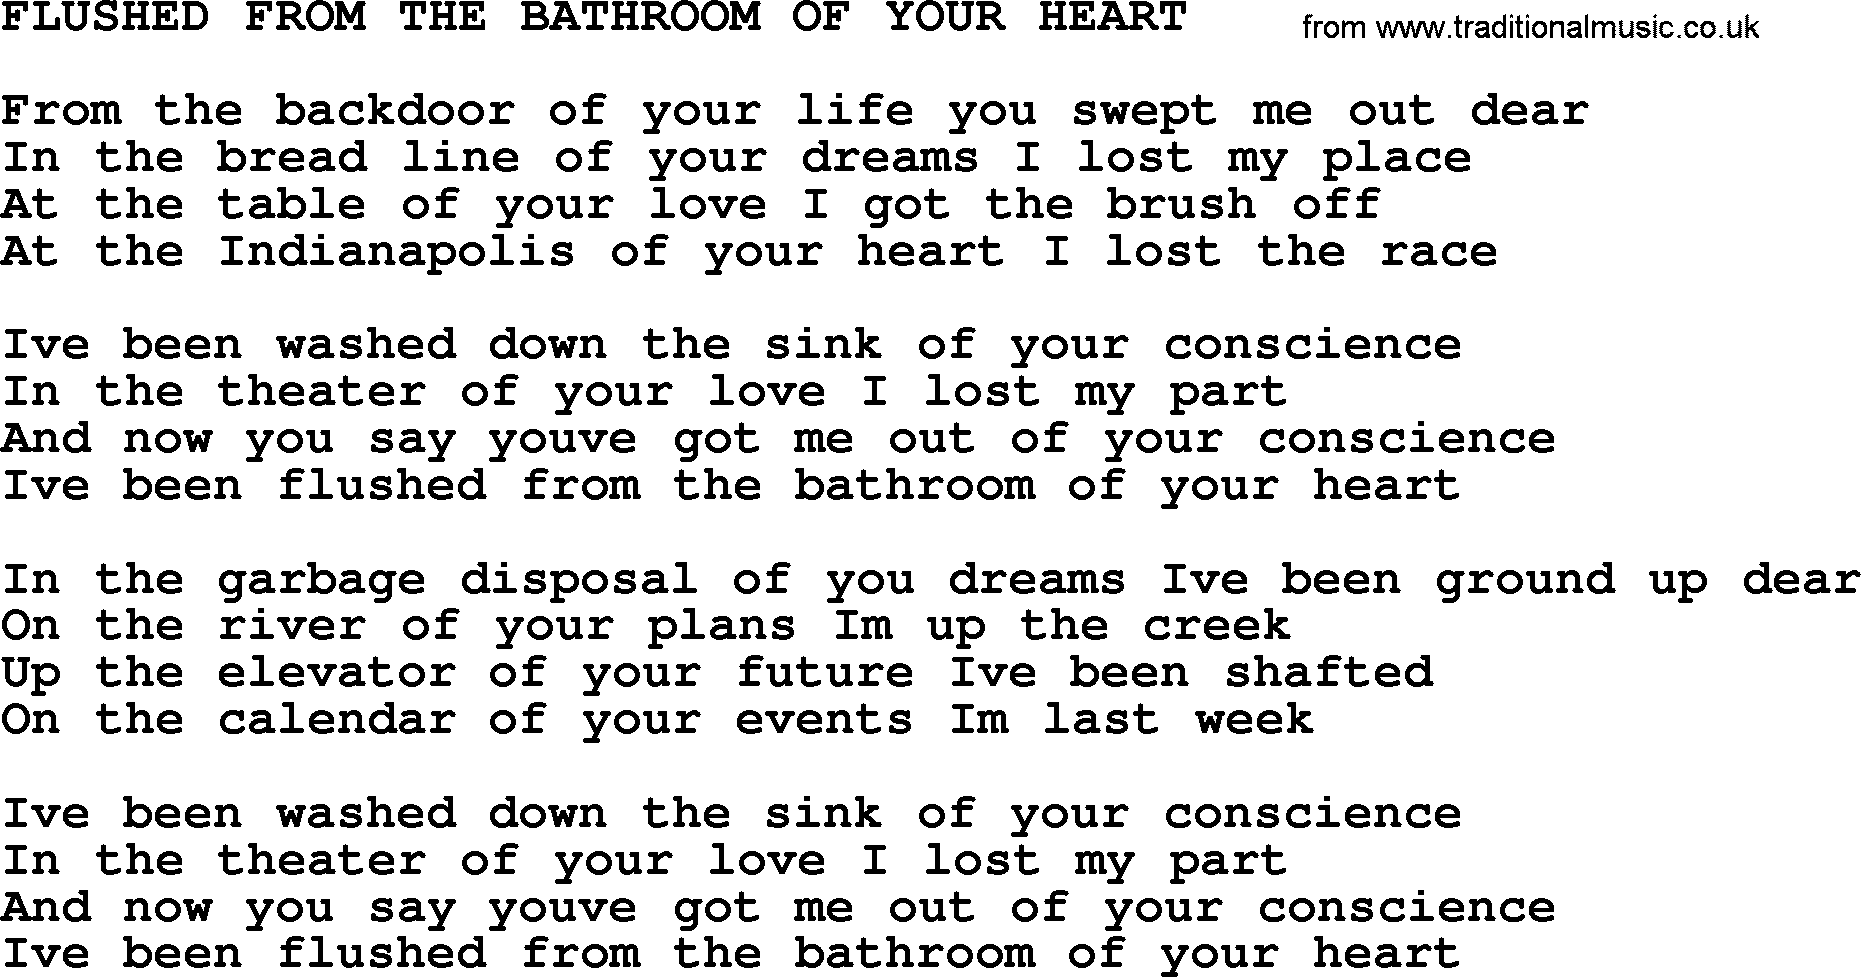 Johnny Cash song Flushed From The Bathroom Of Your Heart.txt lyrics